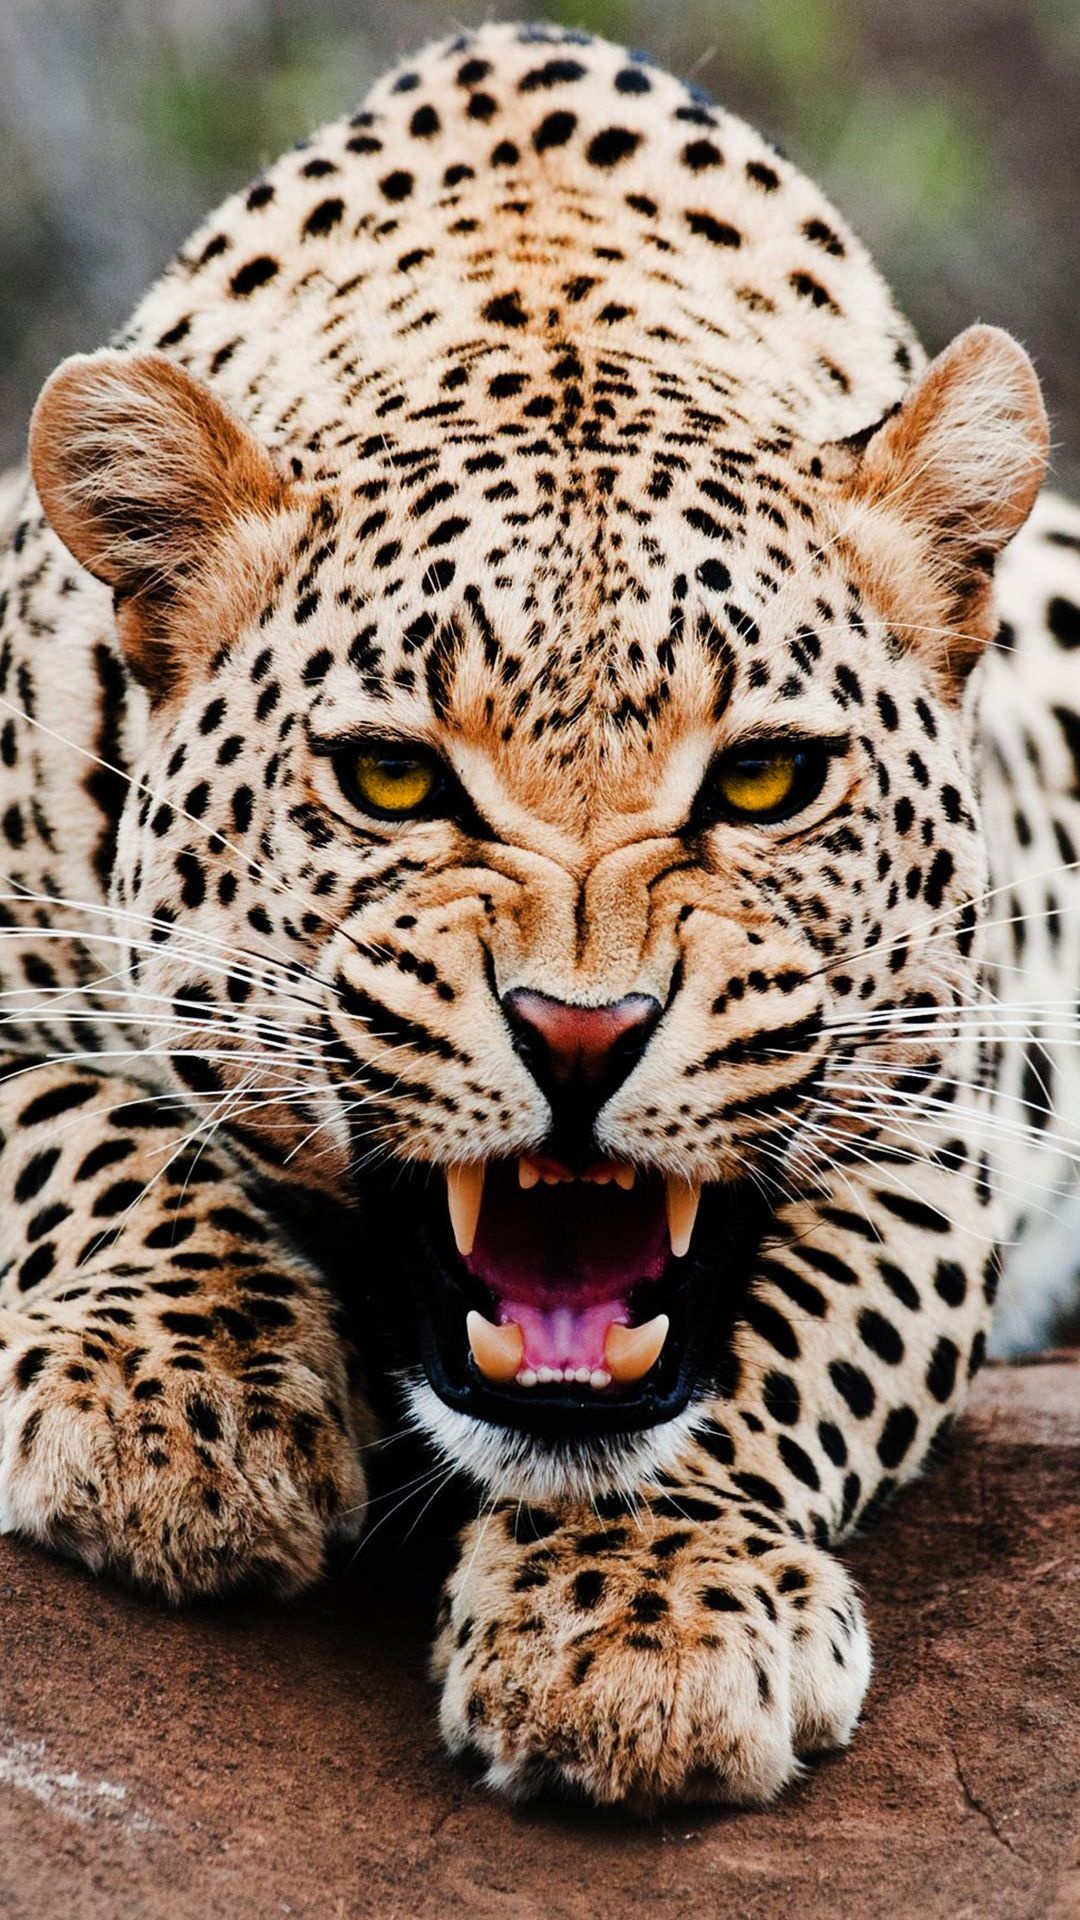 Leopard iPhone wallpapers, Cool backgrounds, 1080x1920 Full HD Handy